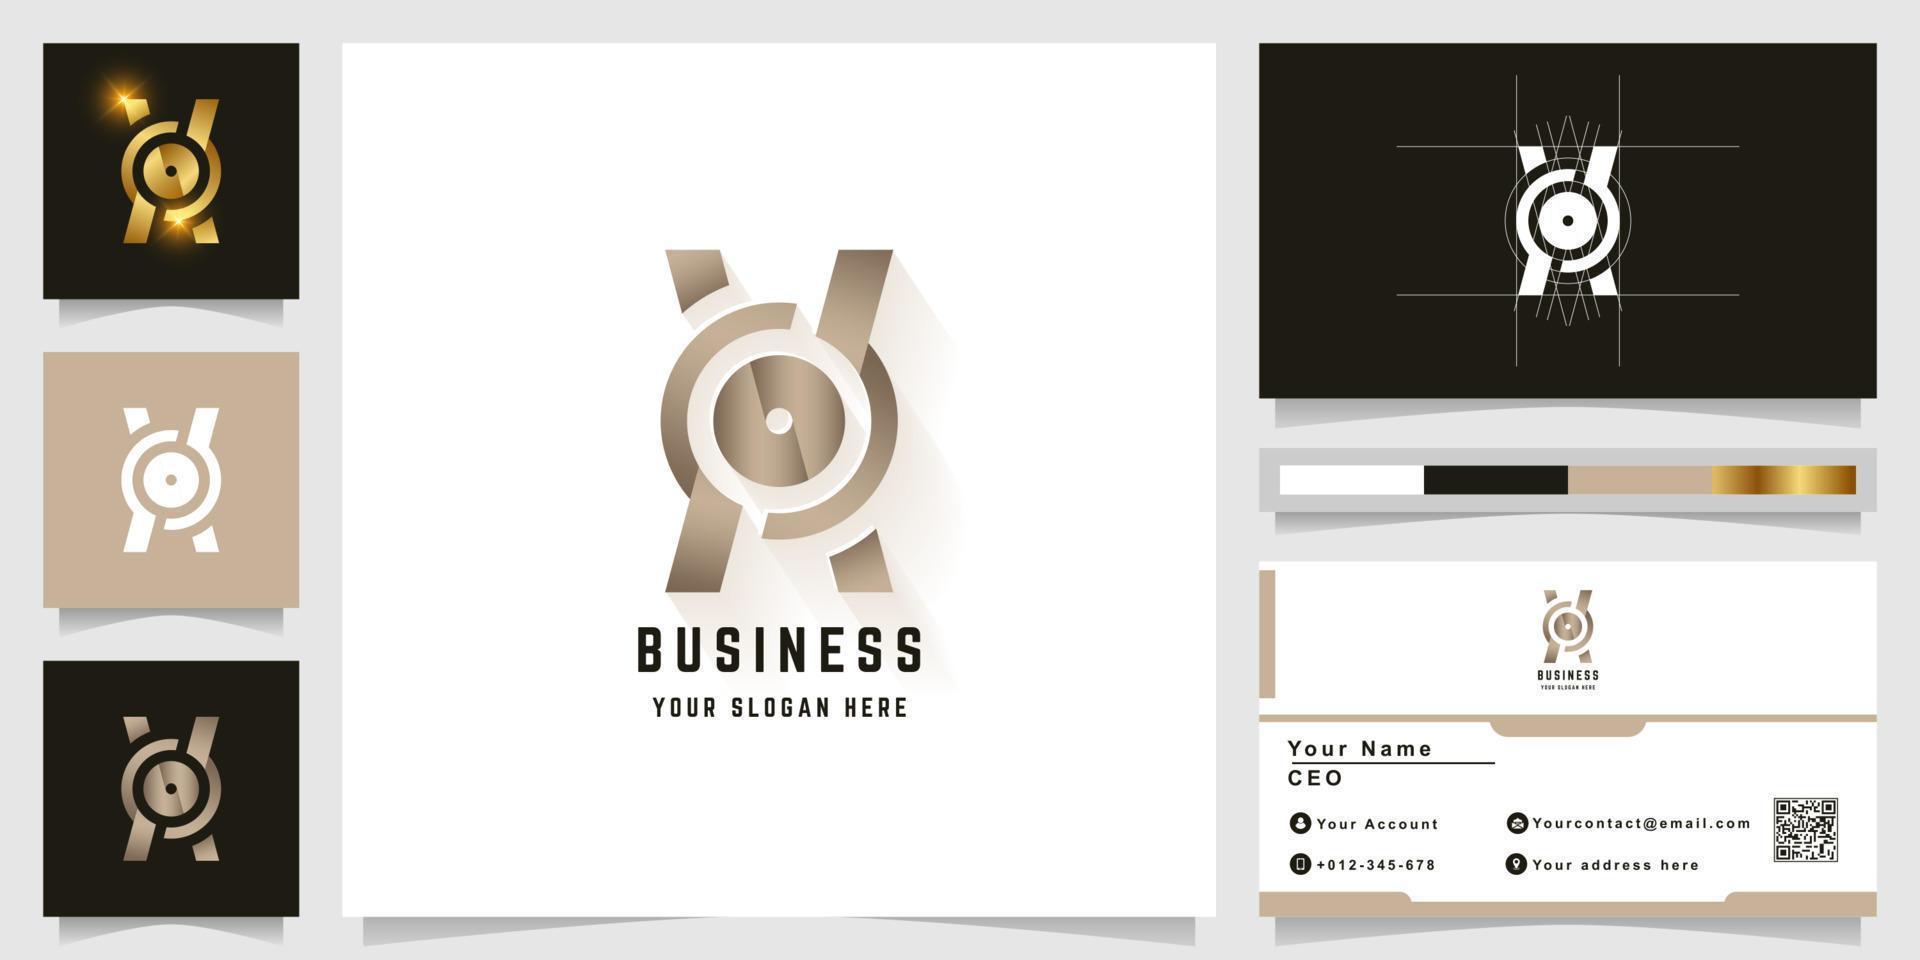 Letter X or XO monogram logo with business card design vector